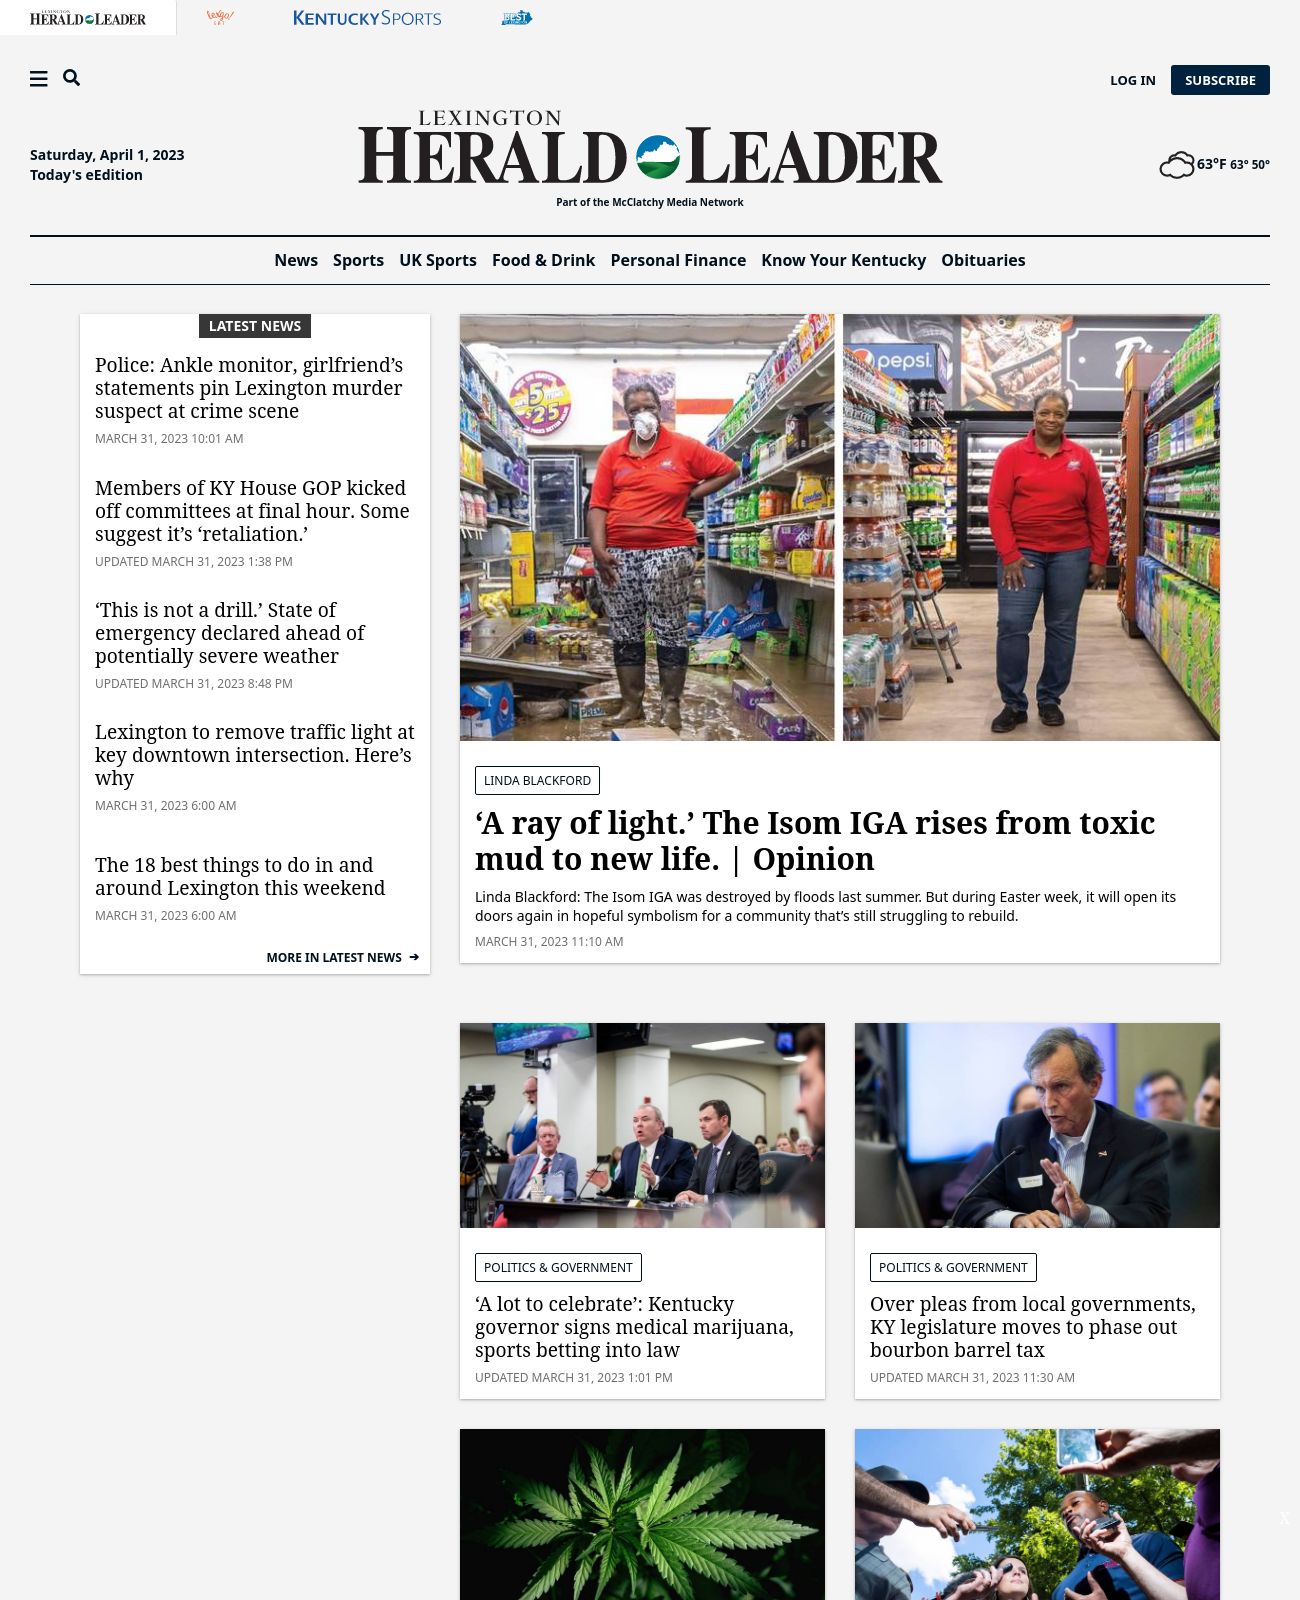 Lexington Herald-Leader at 2023-03-31 22:03:37-04:00 local time